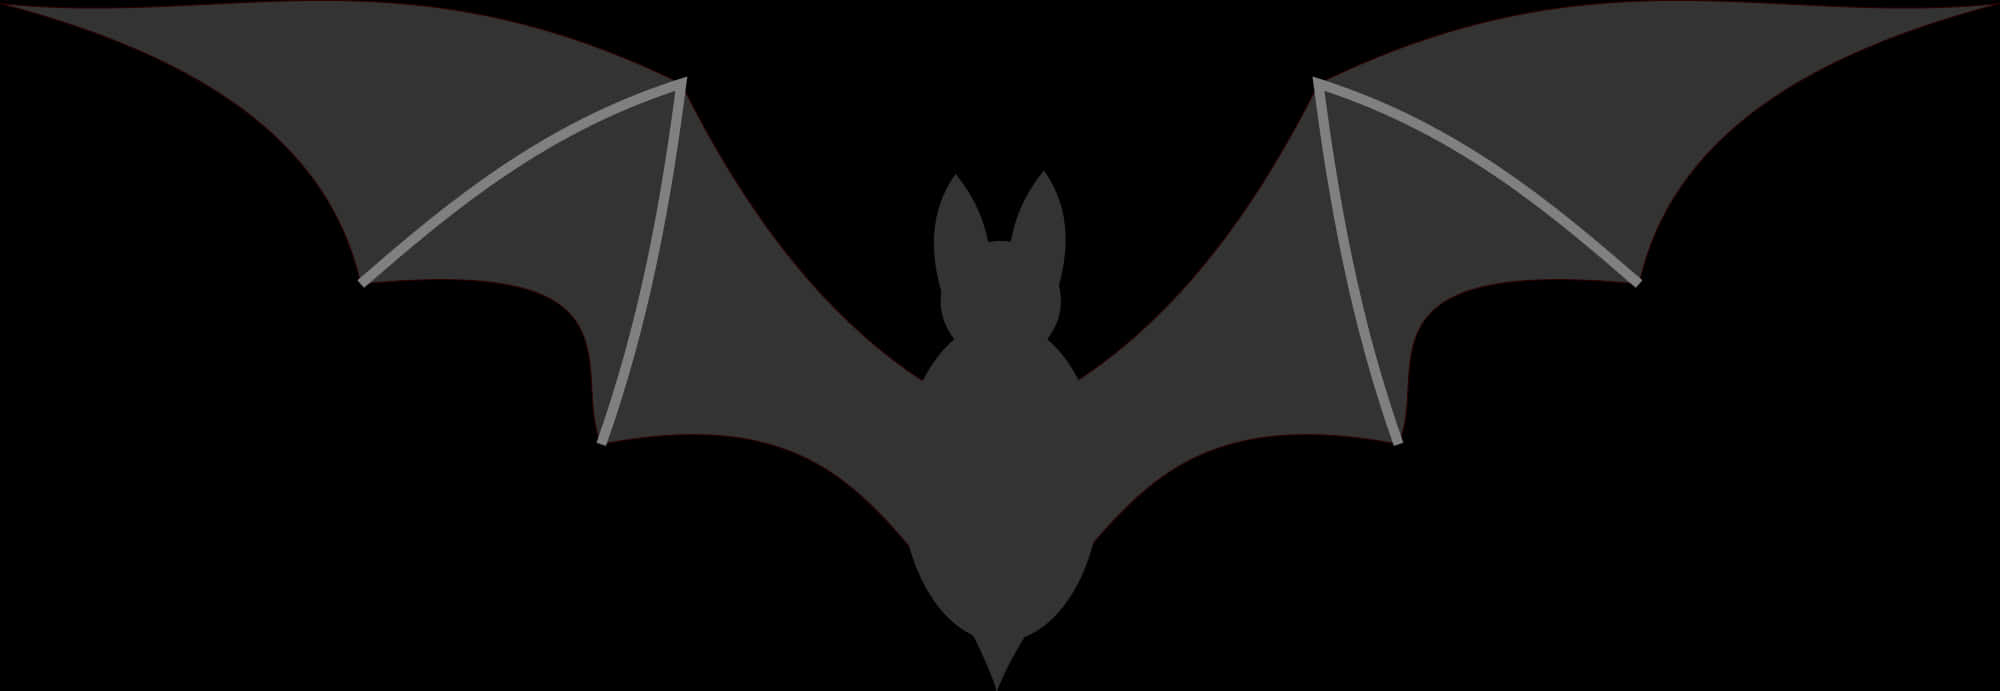 Silhouetteof Bats Flying PNG